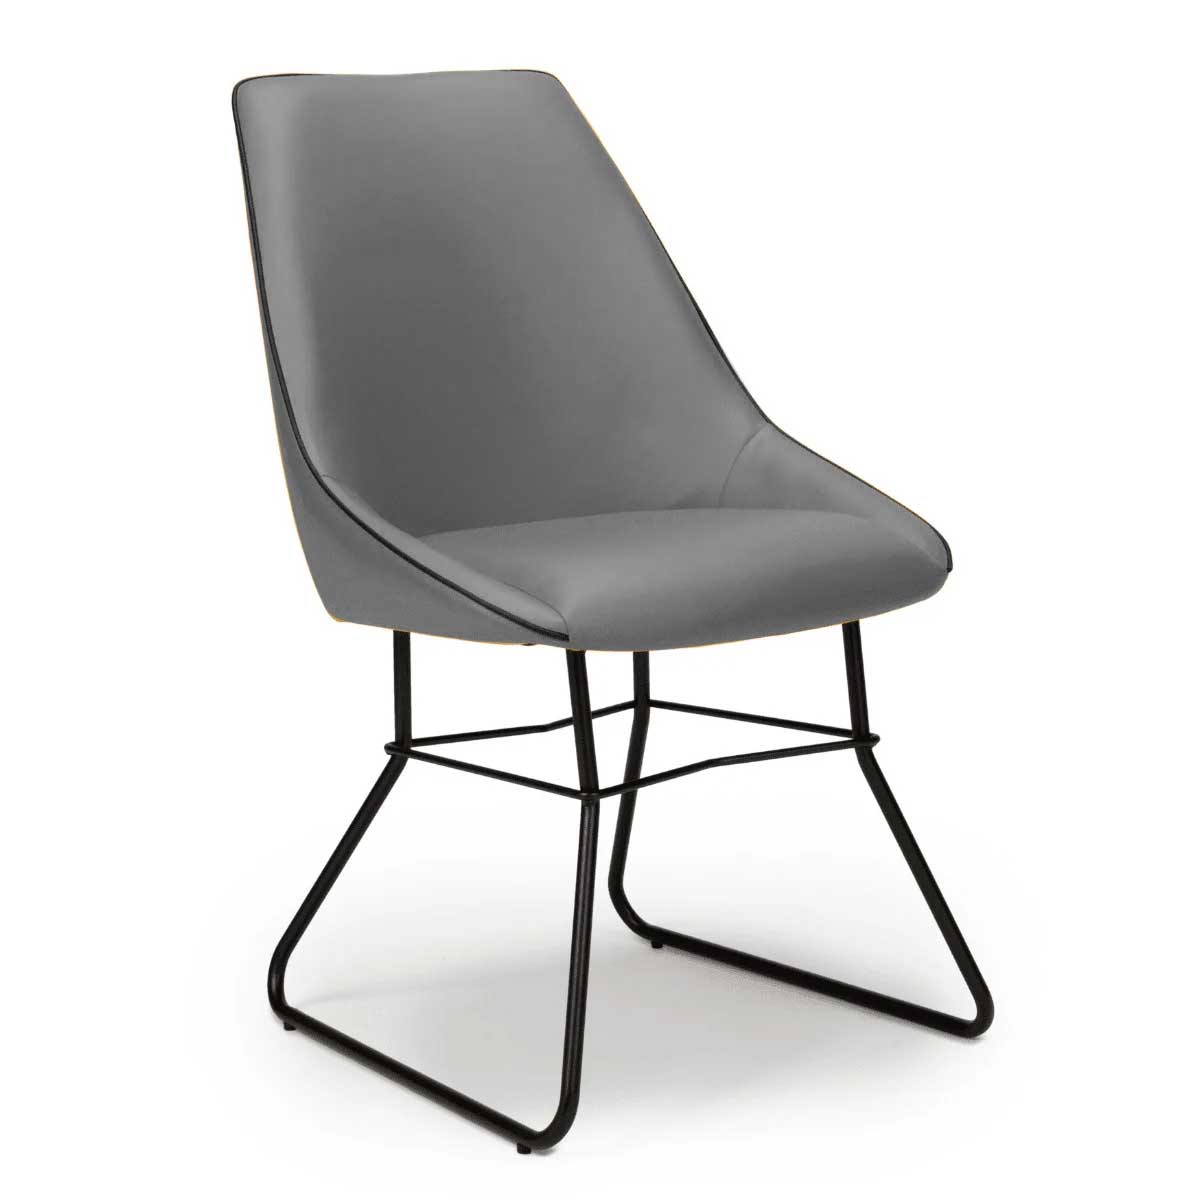 Carrig Grey Dining Chair